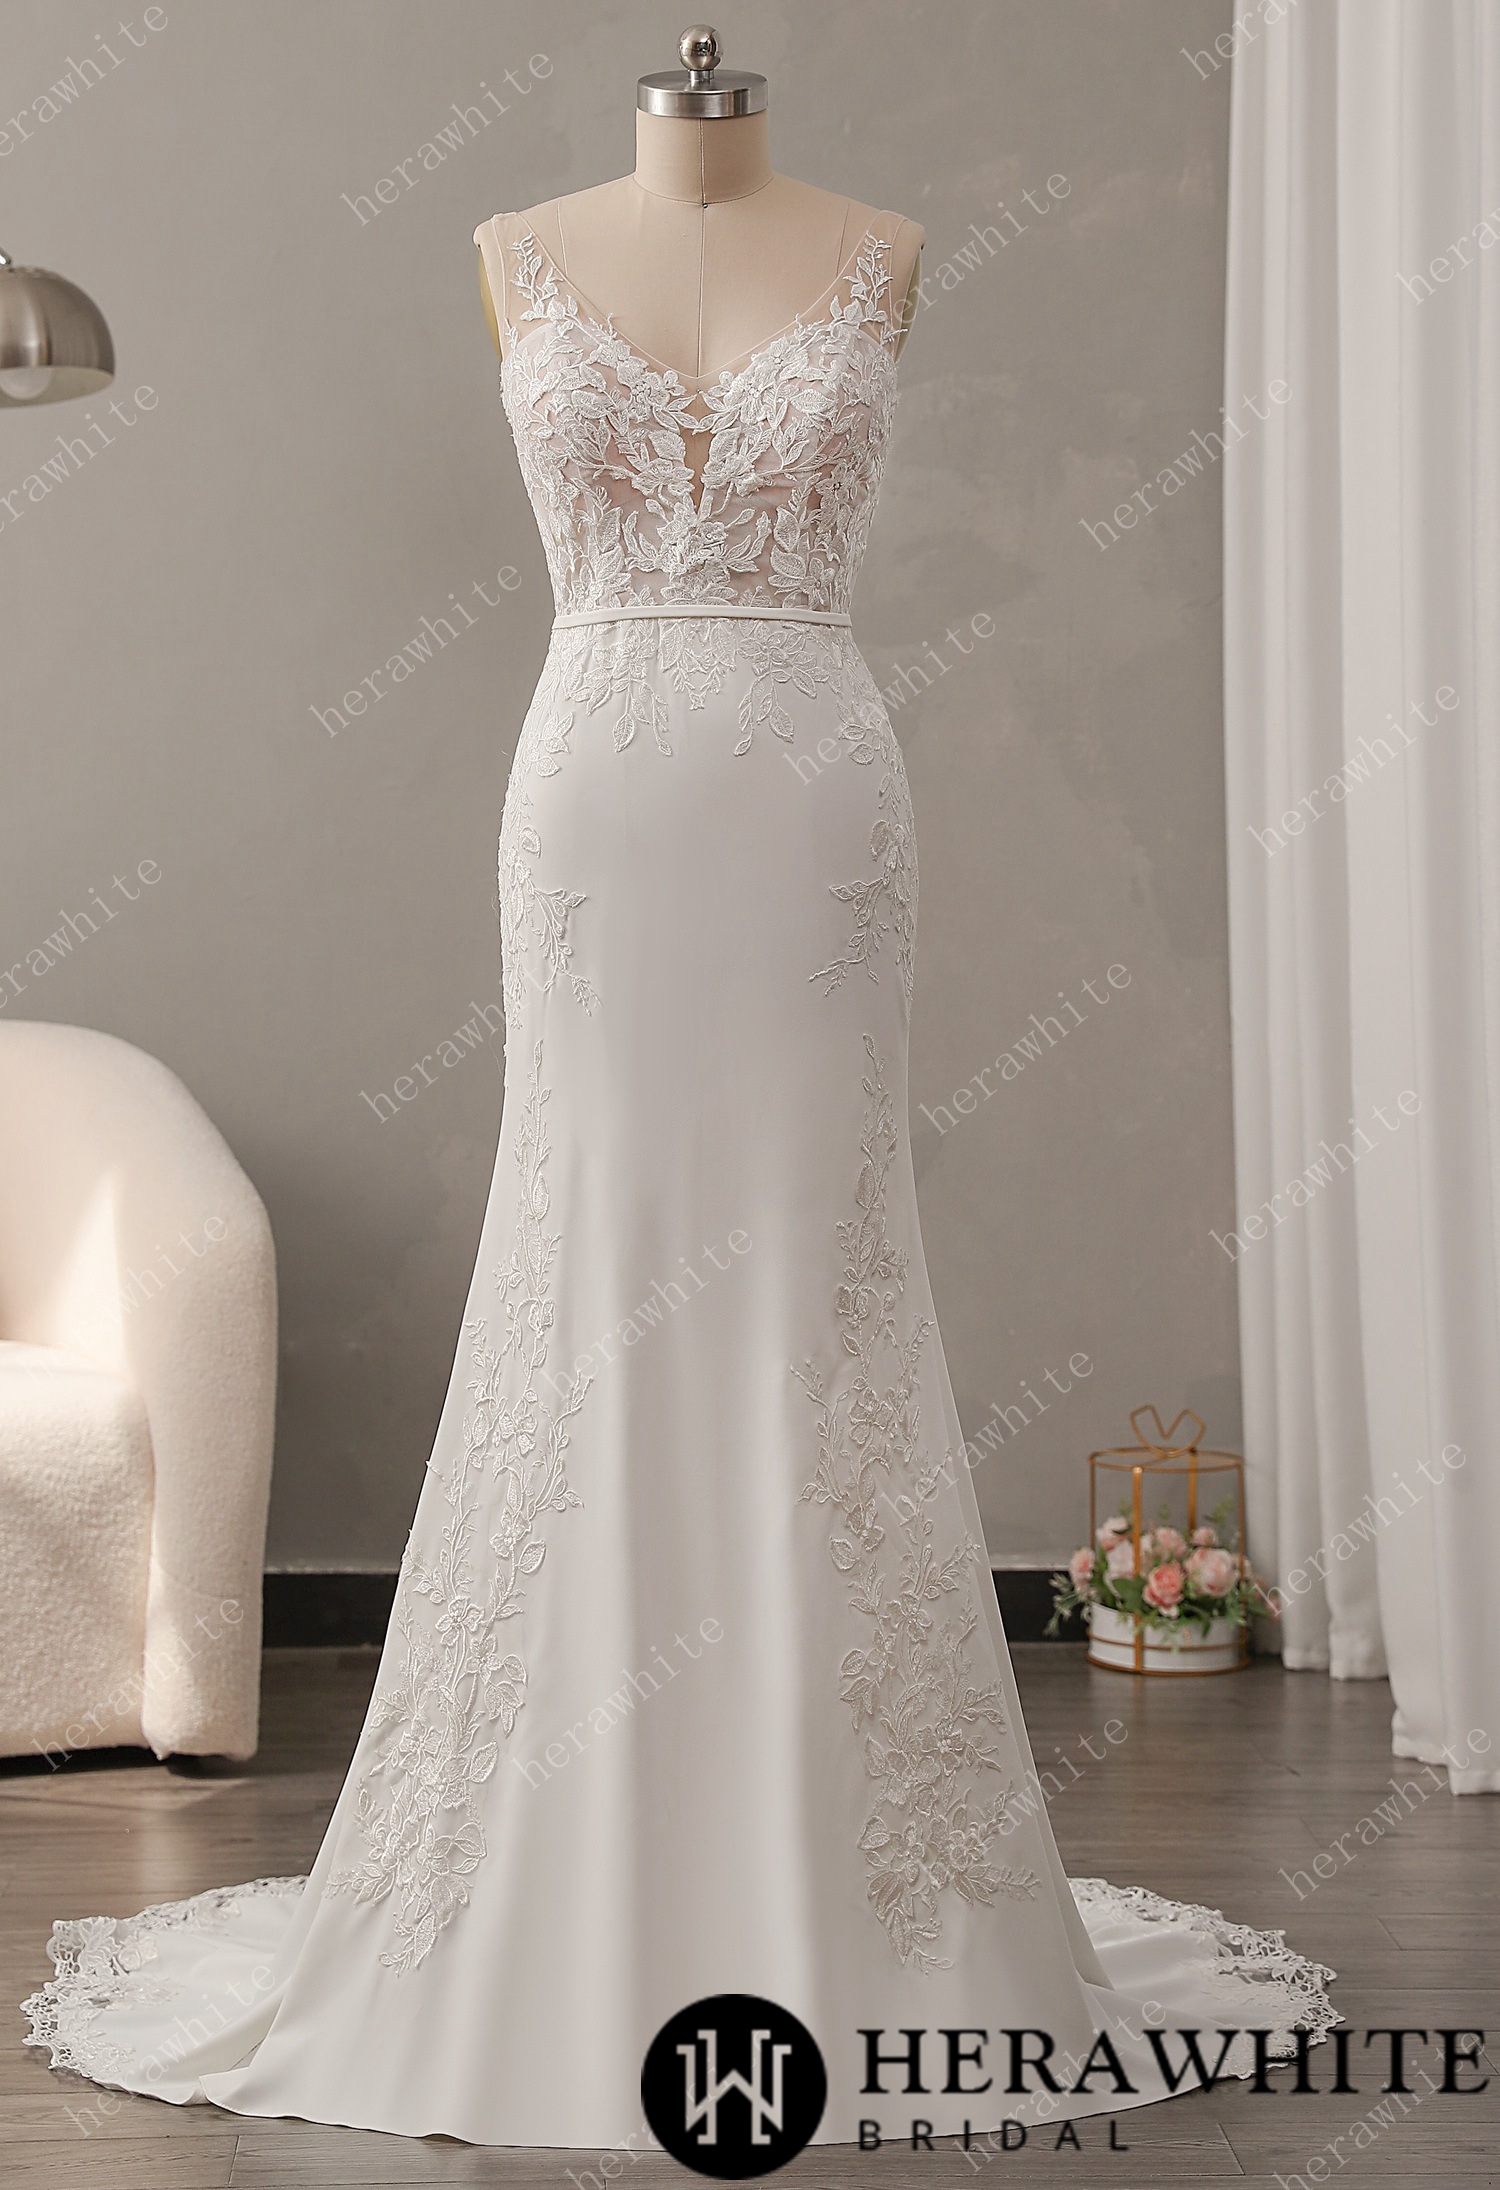 Romantic Lace Sheath Wedding Dress with Low Back